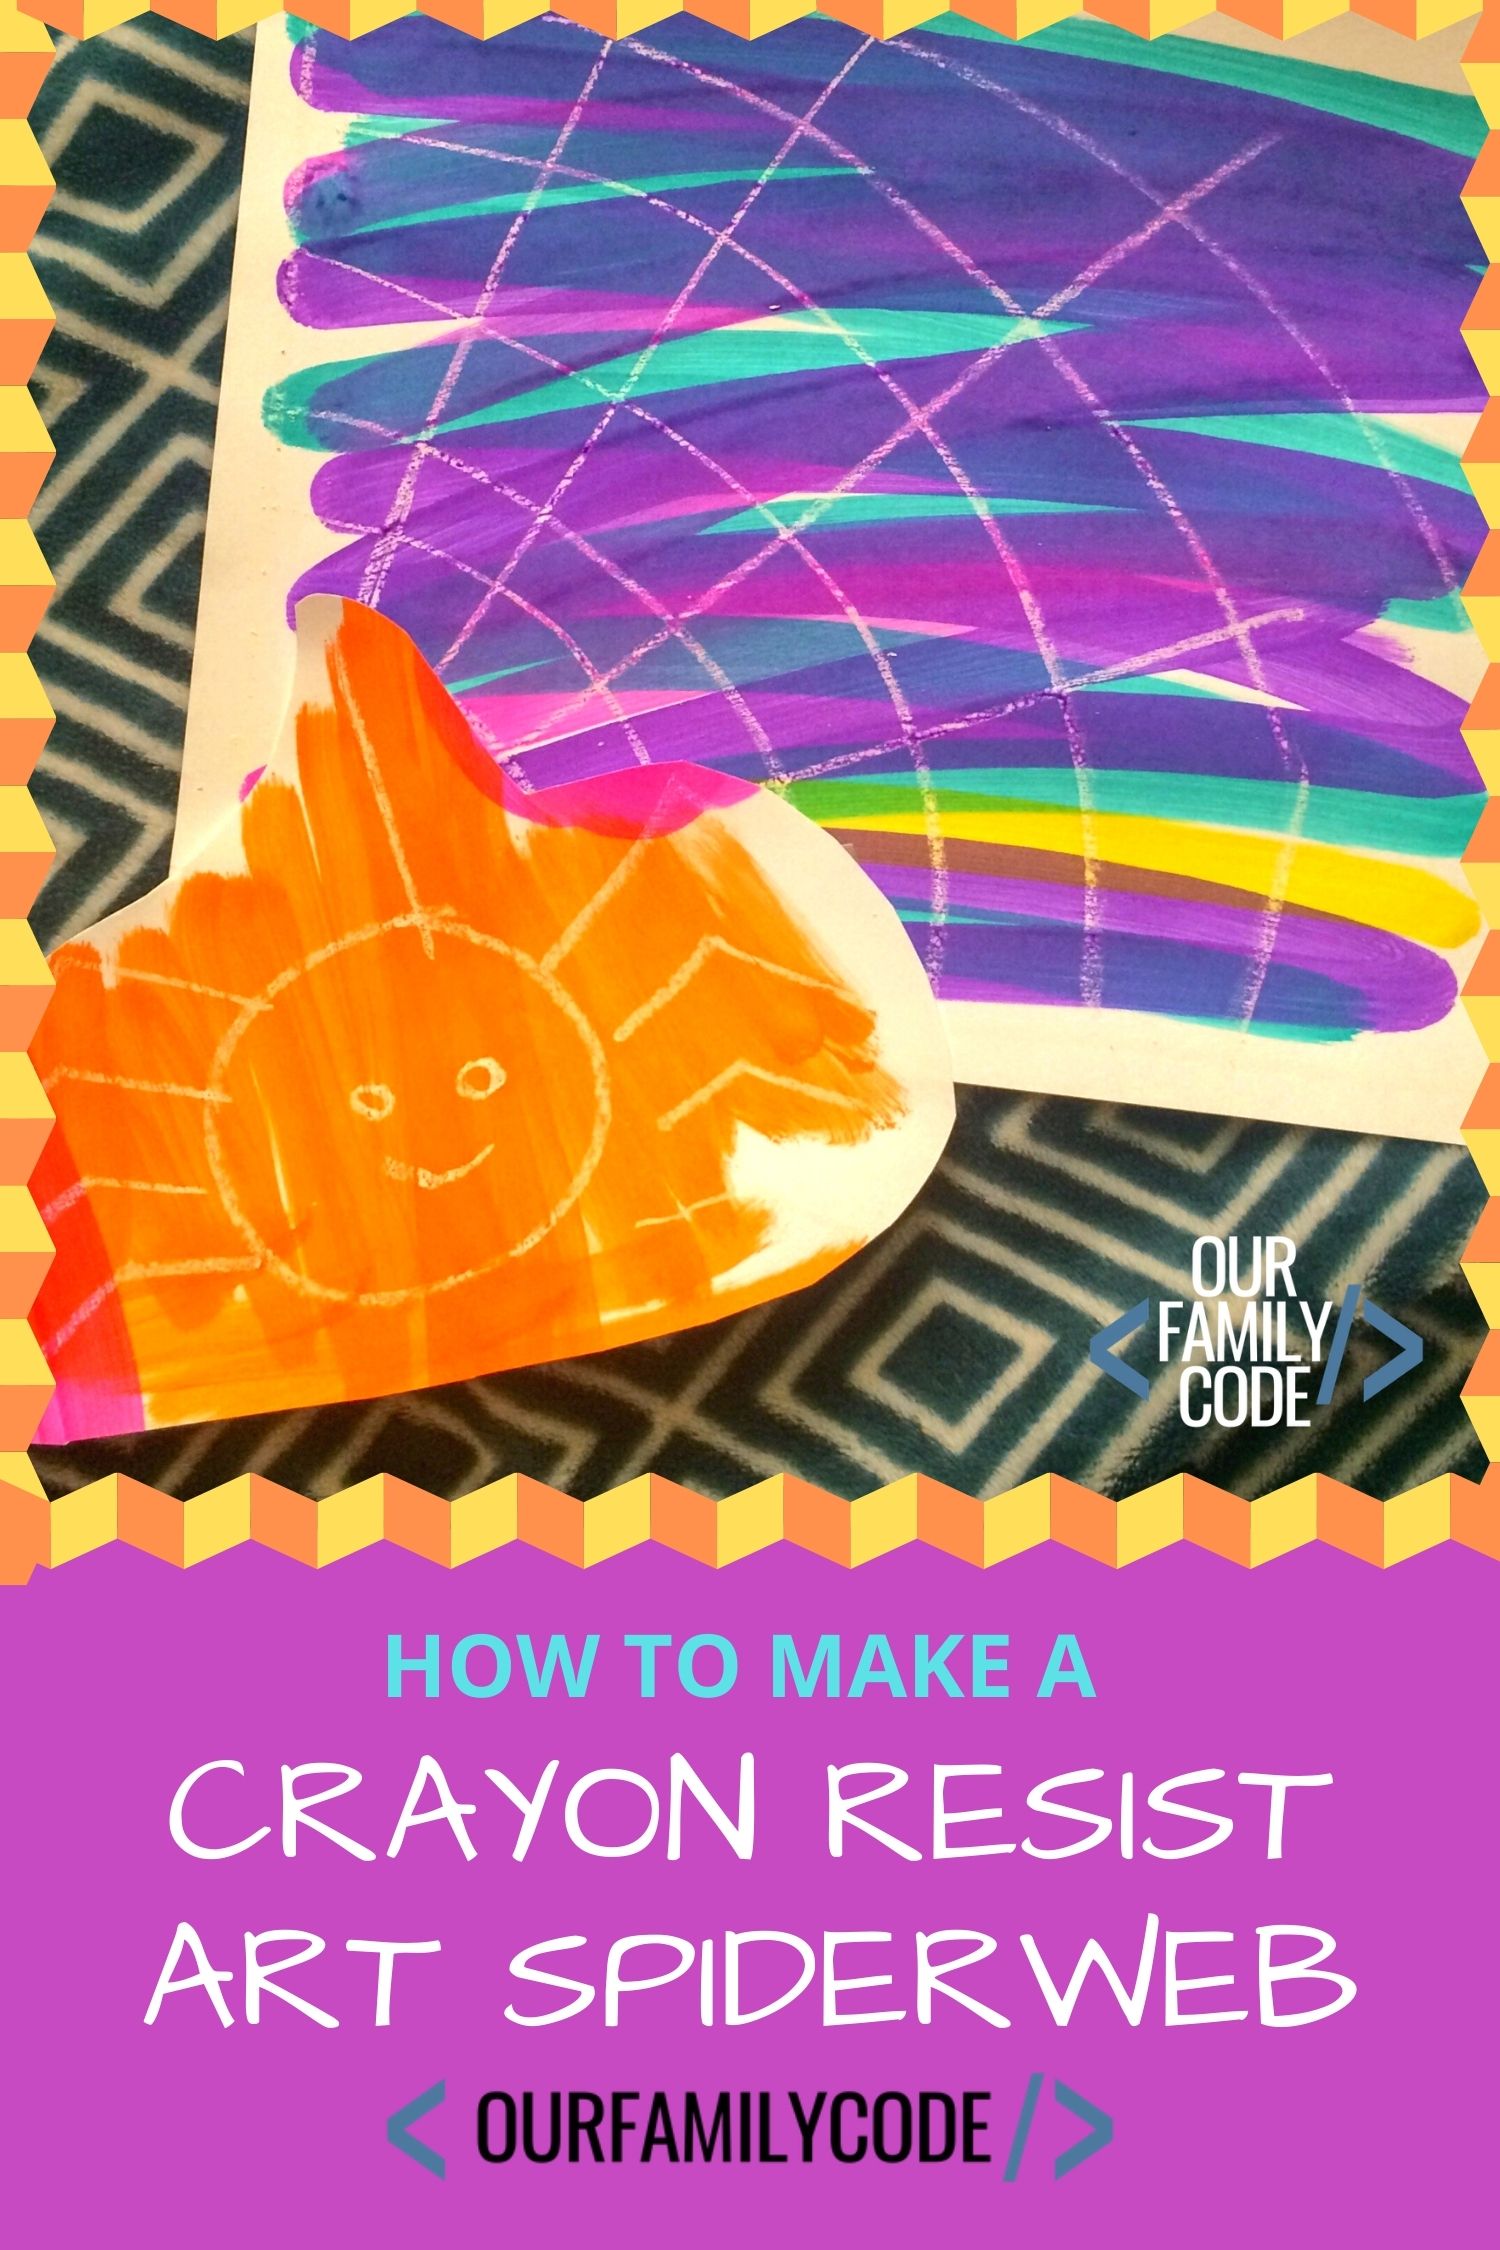 We combined optical illusion art with crayon resist art to make a super cool Halloween project for kids. Learn how to make optical illusion resist art here! #howtomakeopticalillusion #opticalillusionhandprints #crayonresistart #halloweenkidcraft #halloweencraftforkids #resistartproject #howtomakecrayonresistart #bingomarkerartproject #lessmessartprojects